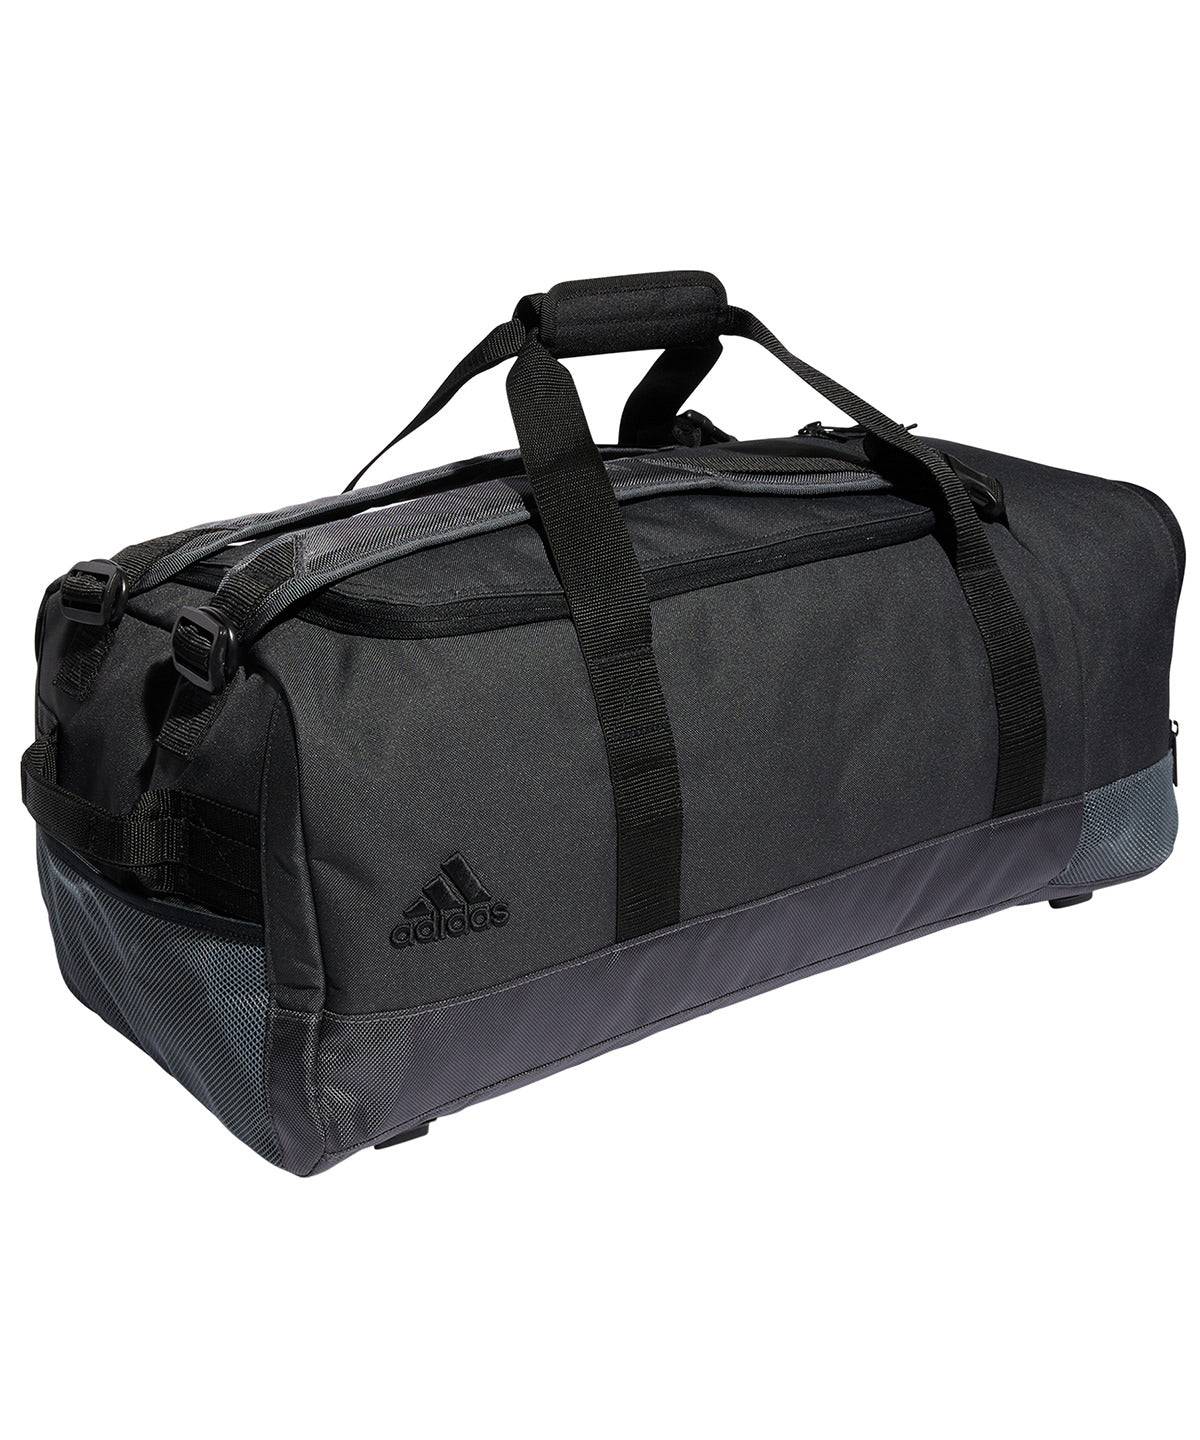 Load image into Gallery viewer, Grey Five - Golf duffle bag
